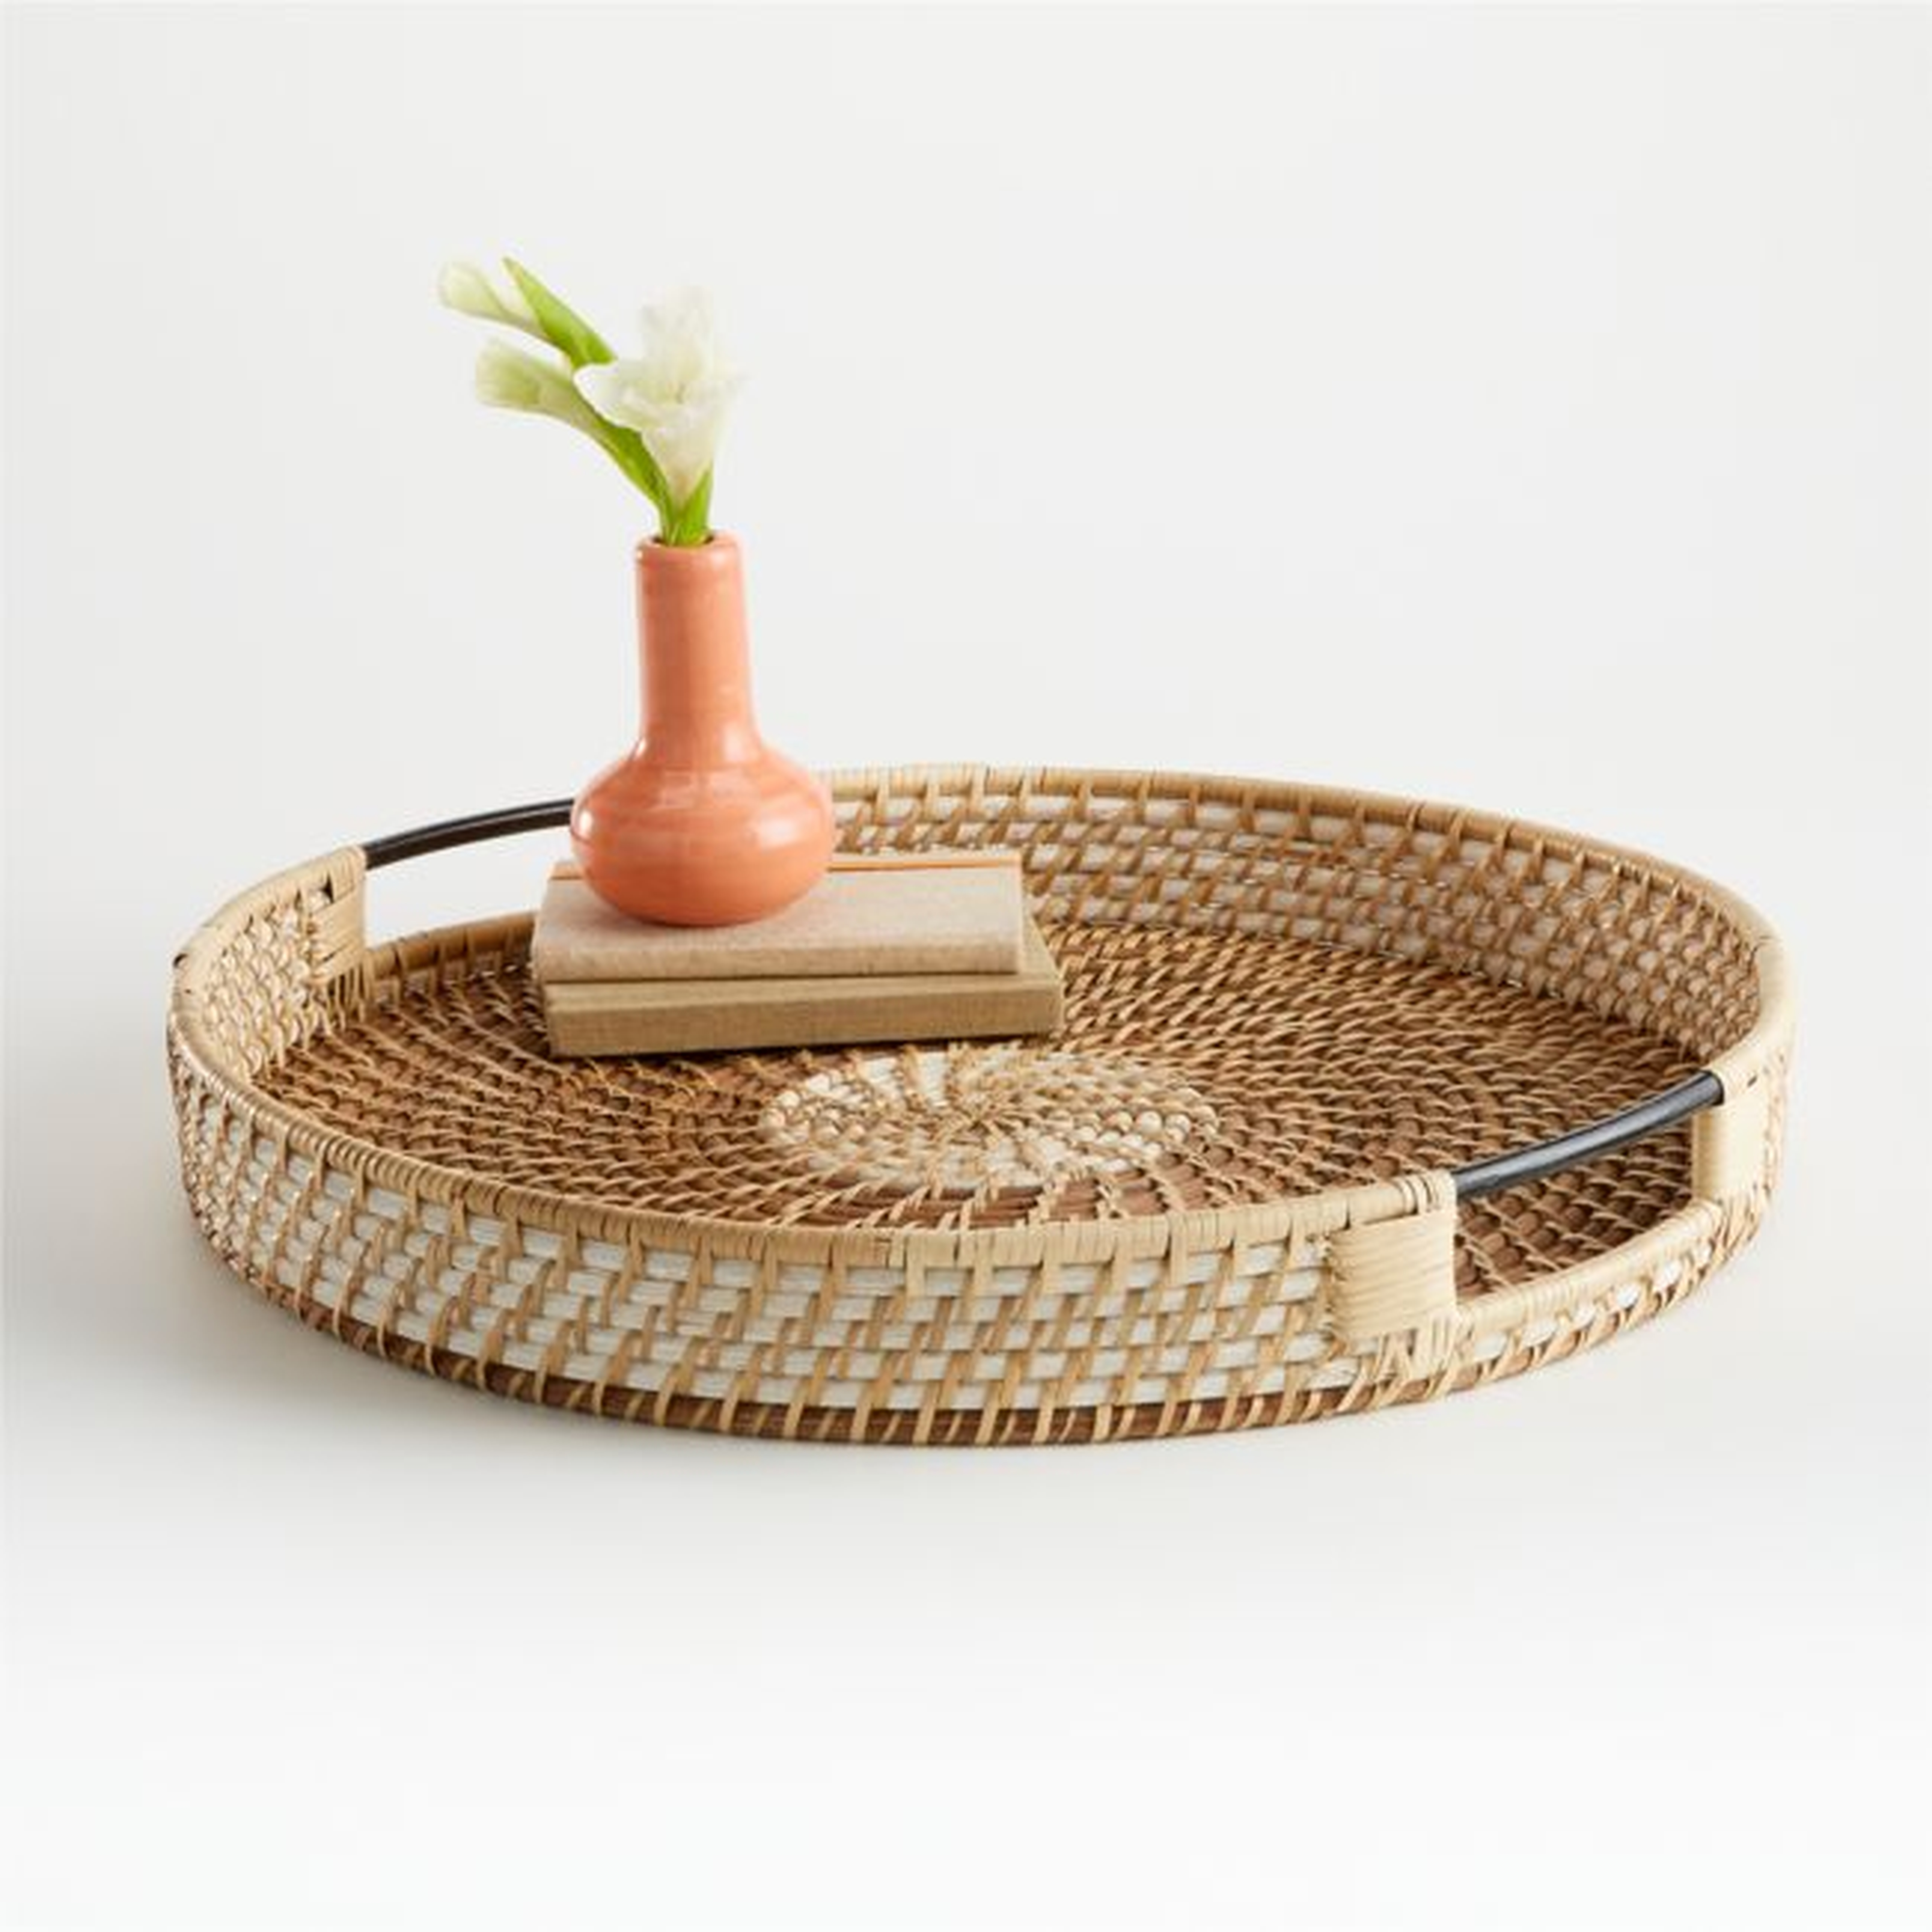 Meza Two Toned Rattan Tray - Crate and Barrel